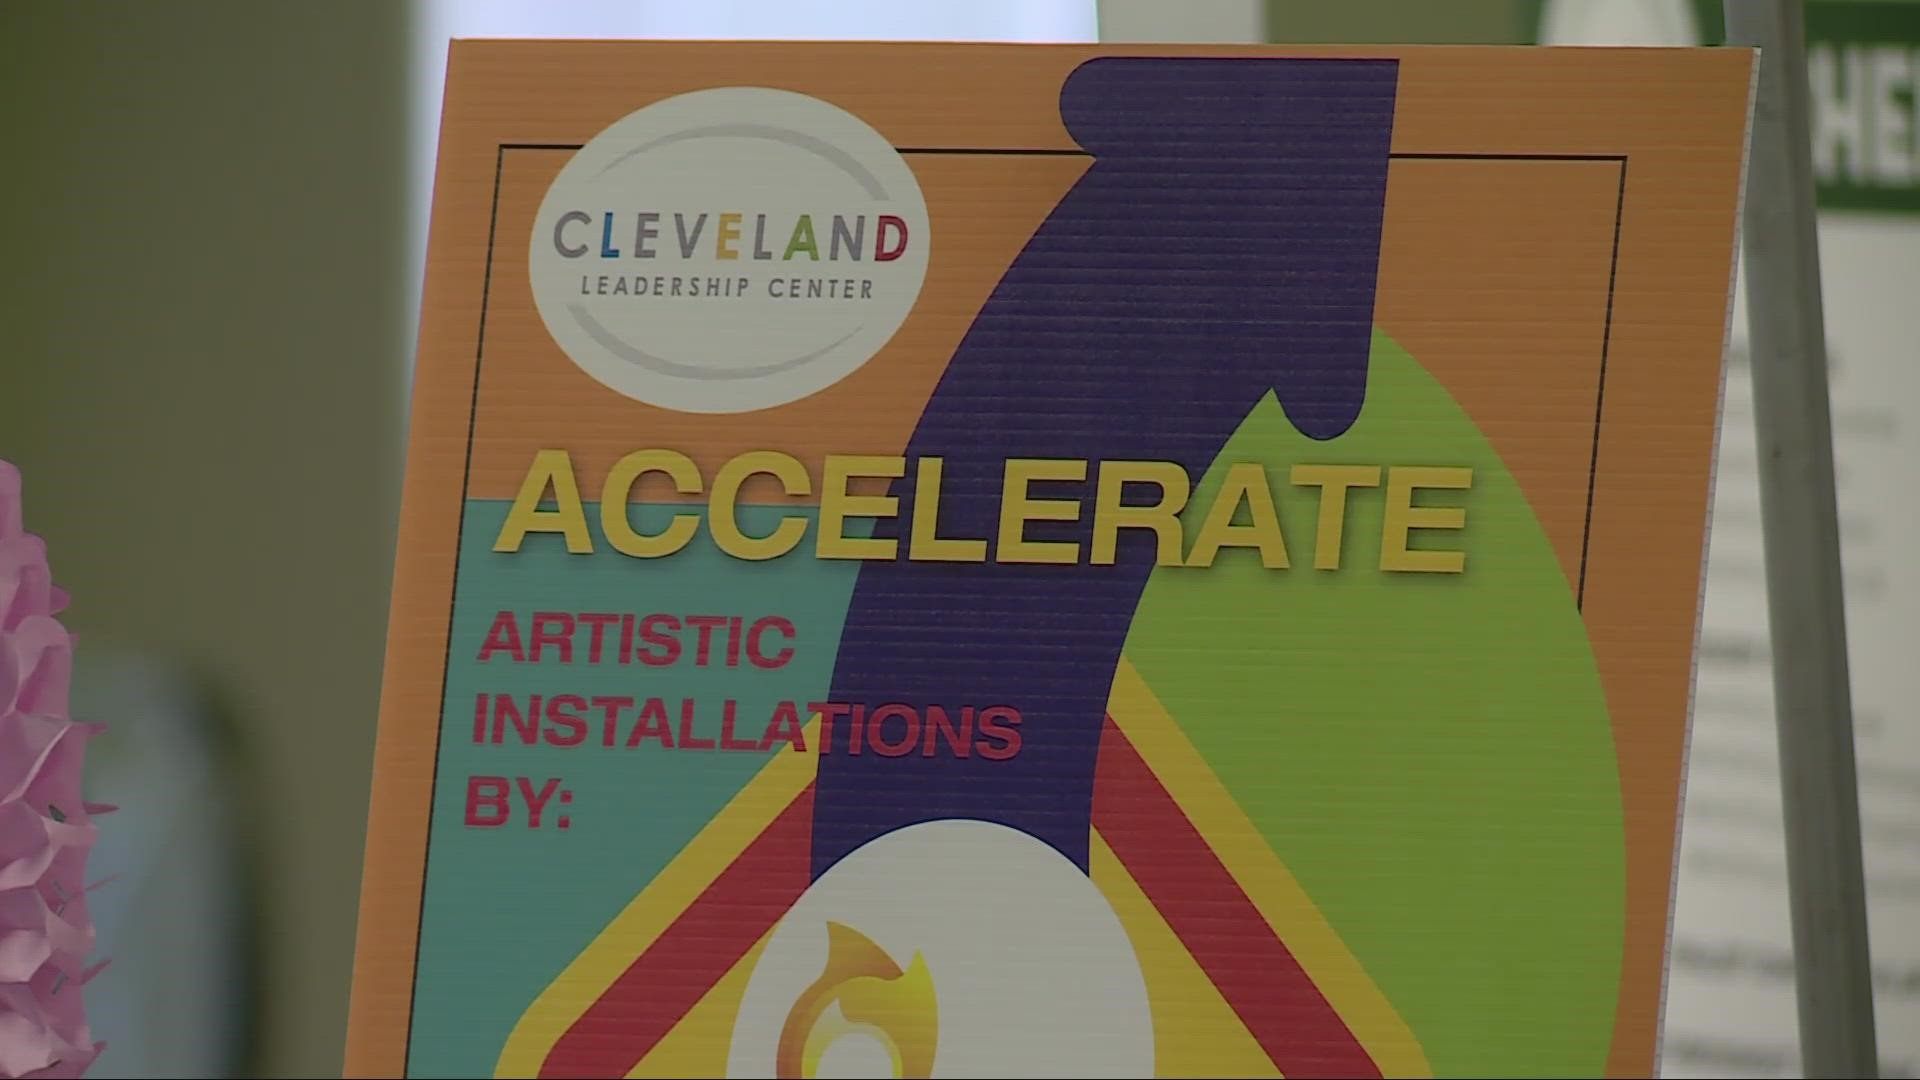 Accelerate: Citizens Make Change civic pitch competition, presented by the Cleveland Leadership Center took place on Feb. 24, 2023.